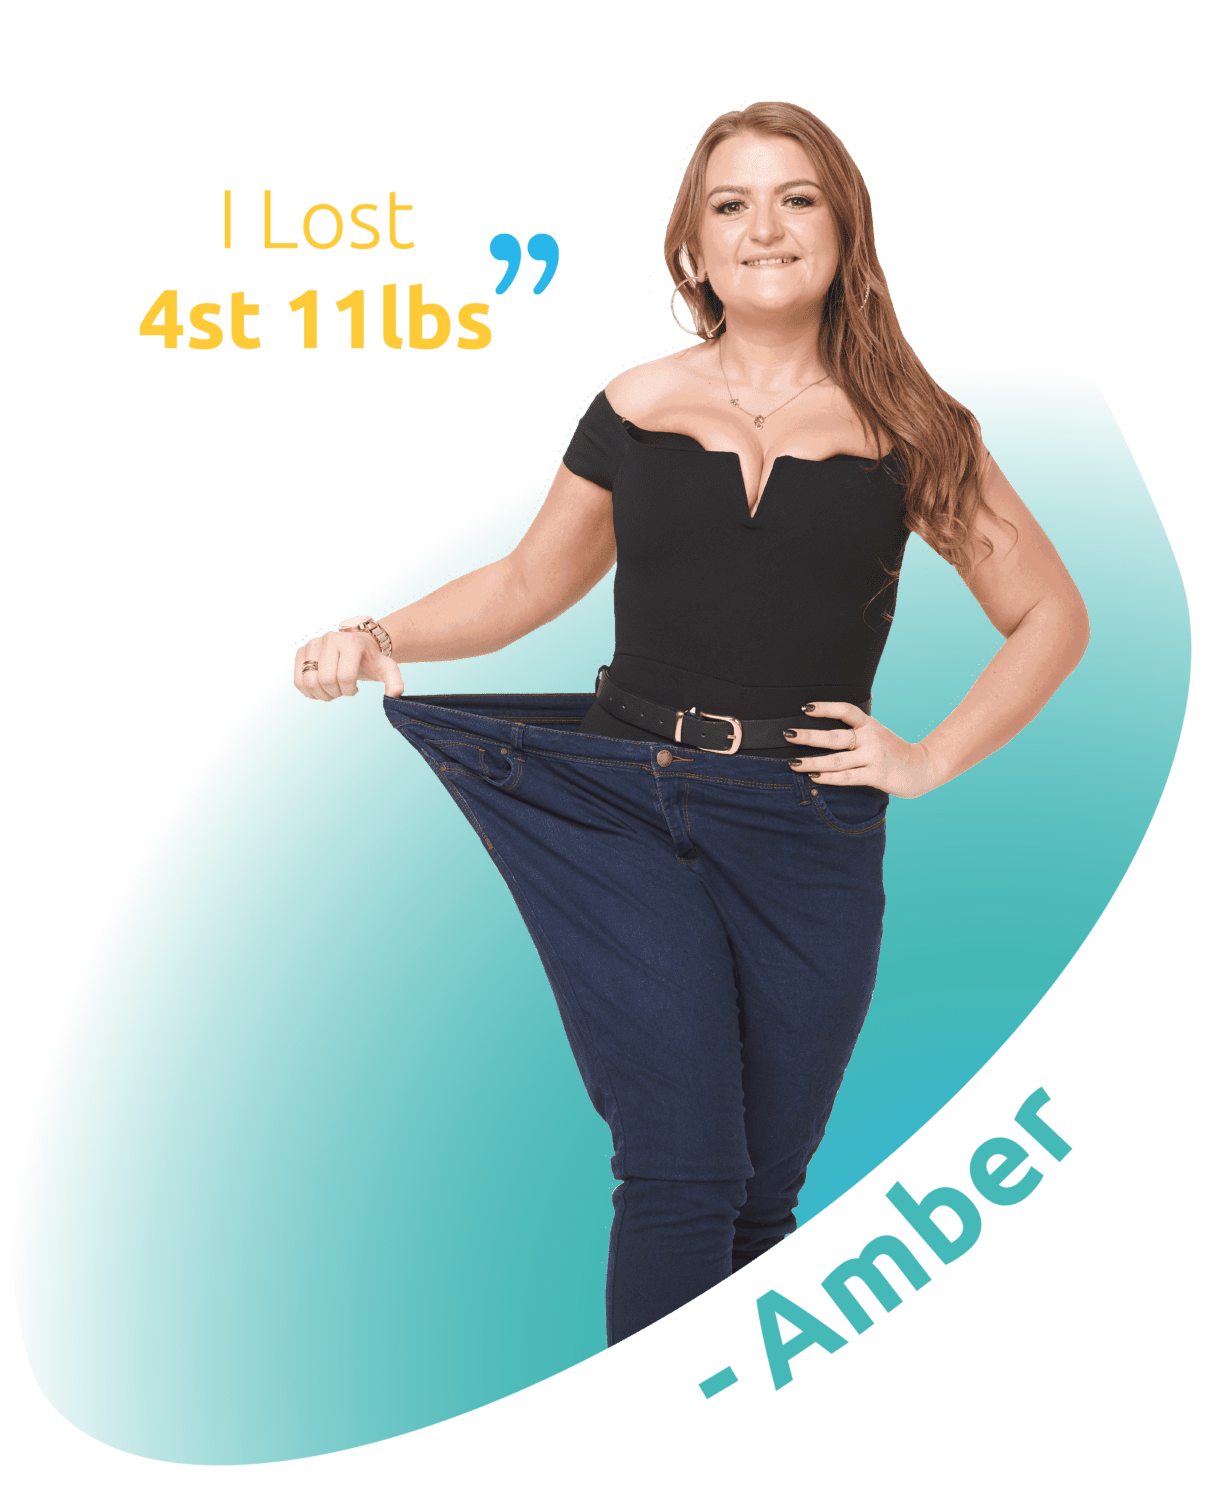 Amber lost 4st 11lbs